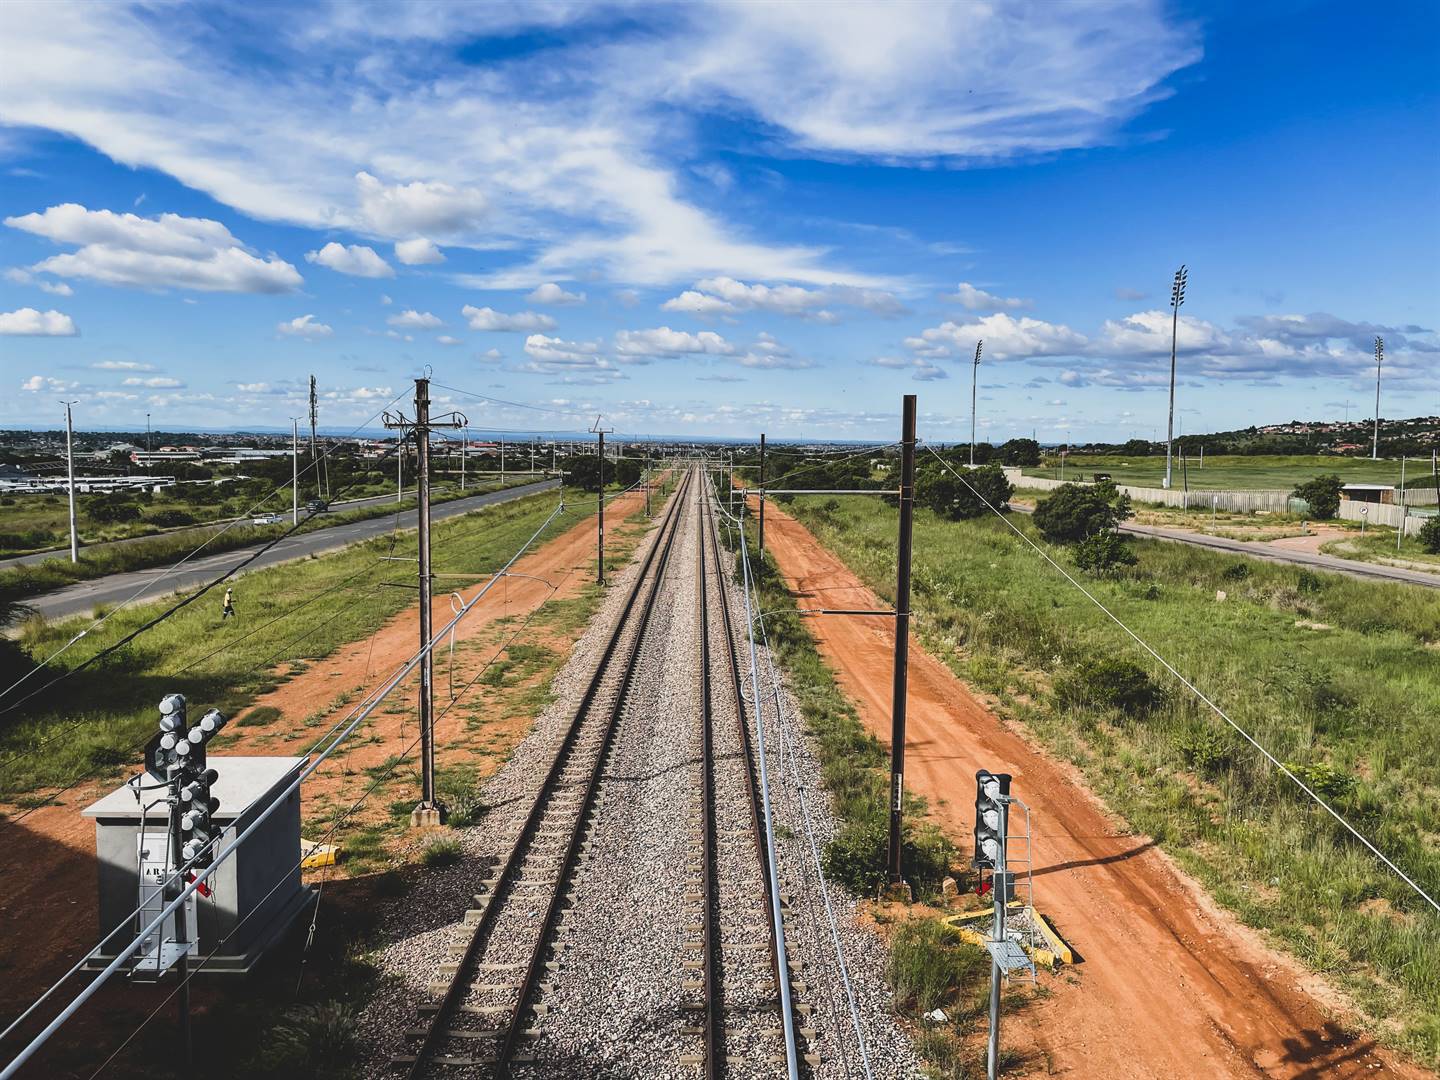 Newly rebuilt train infrastructure on the Mabopane-Pretoria corridor remains unused after Prasa missed another deadline for the resumption of services. Photo: Sthembiso Lebuso